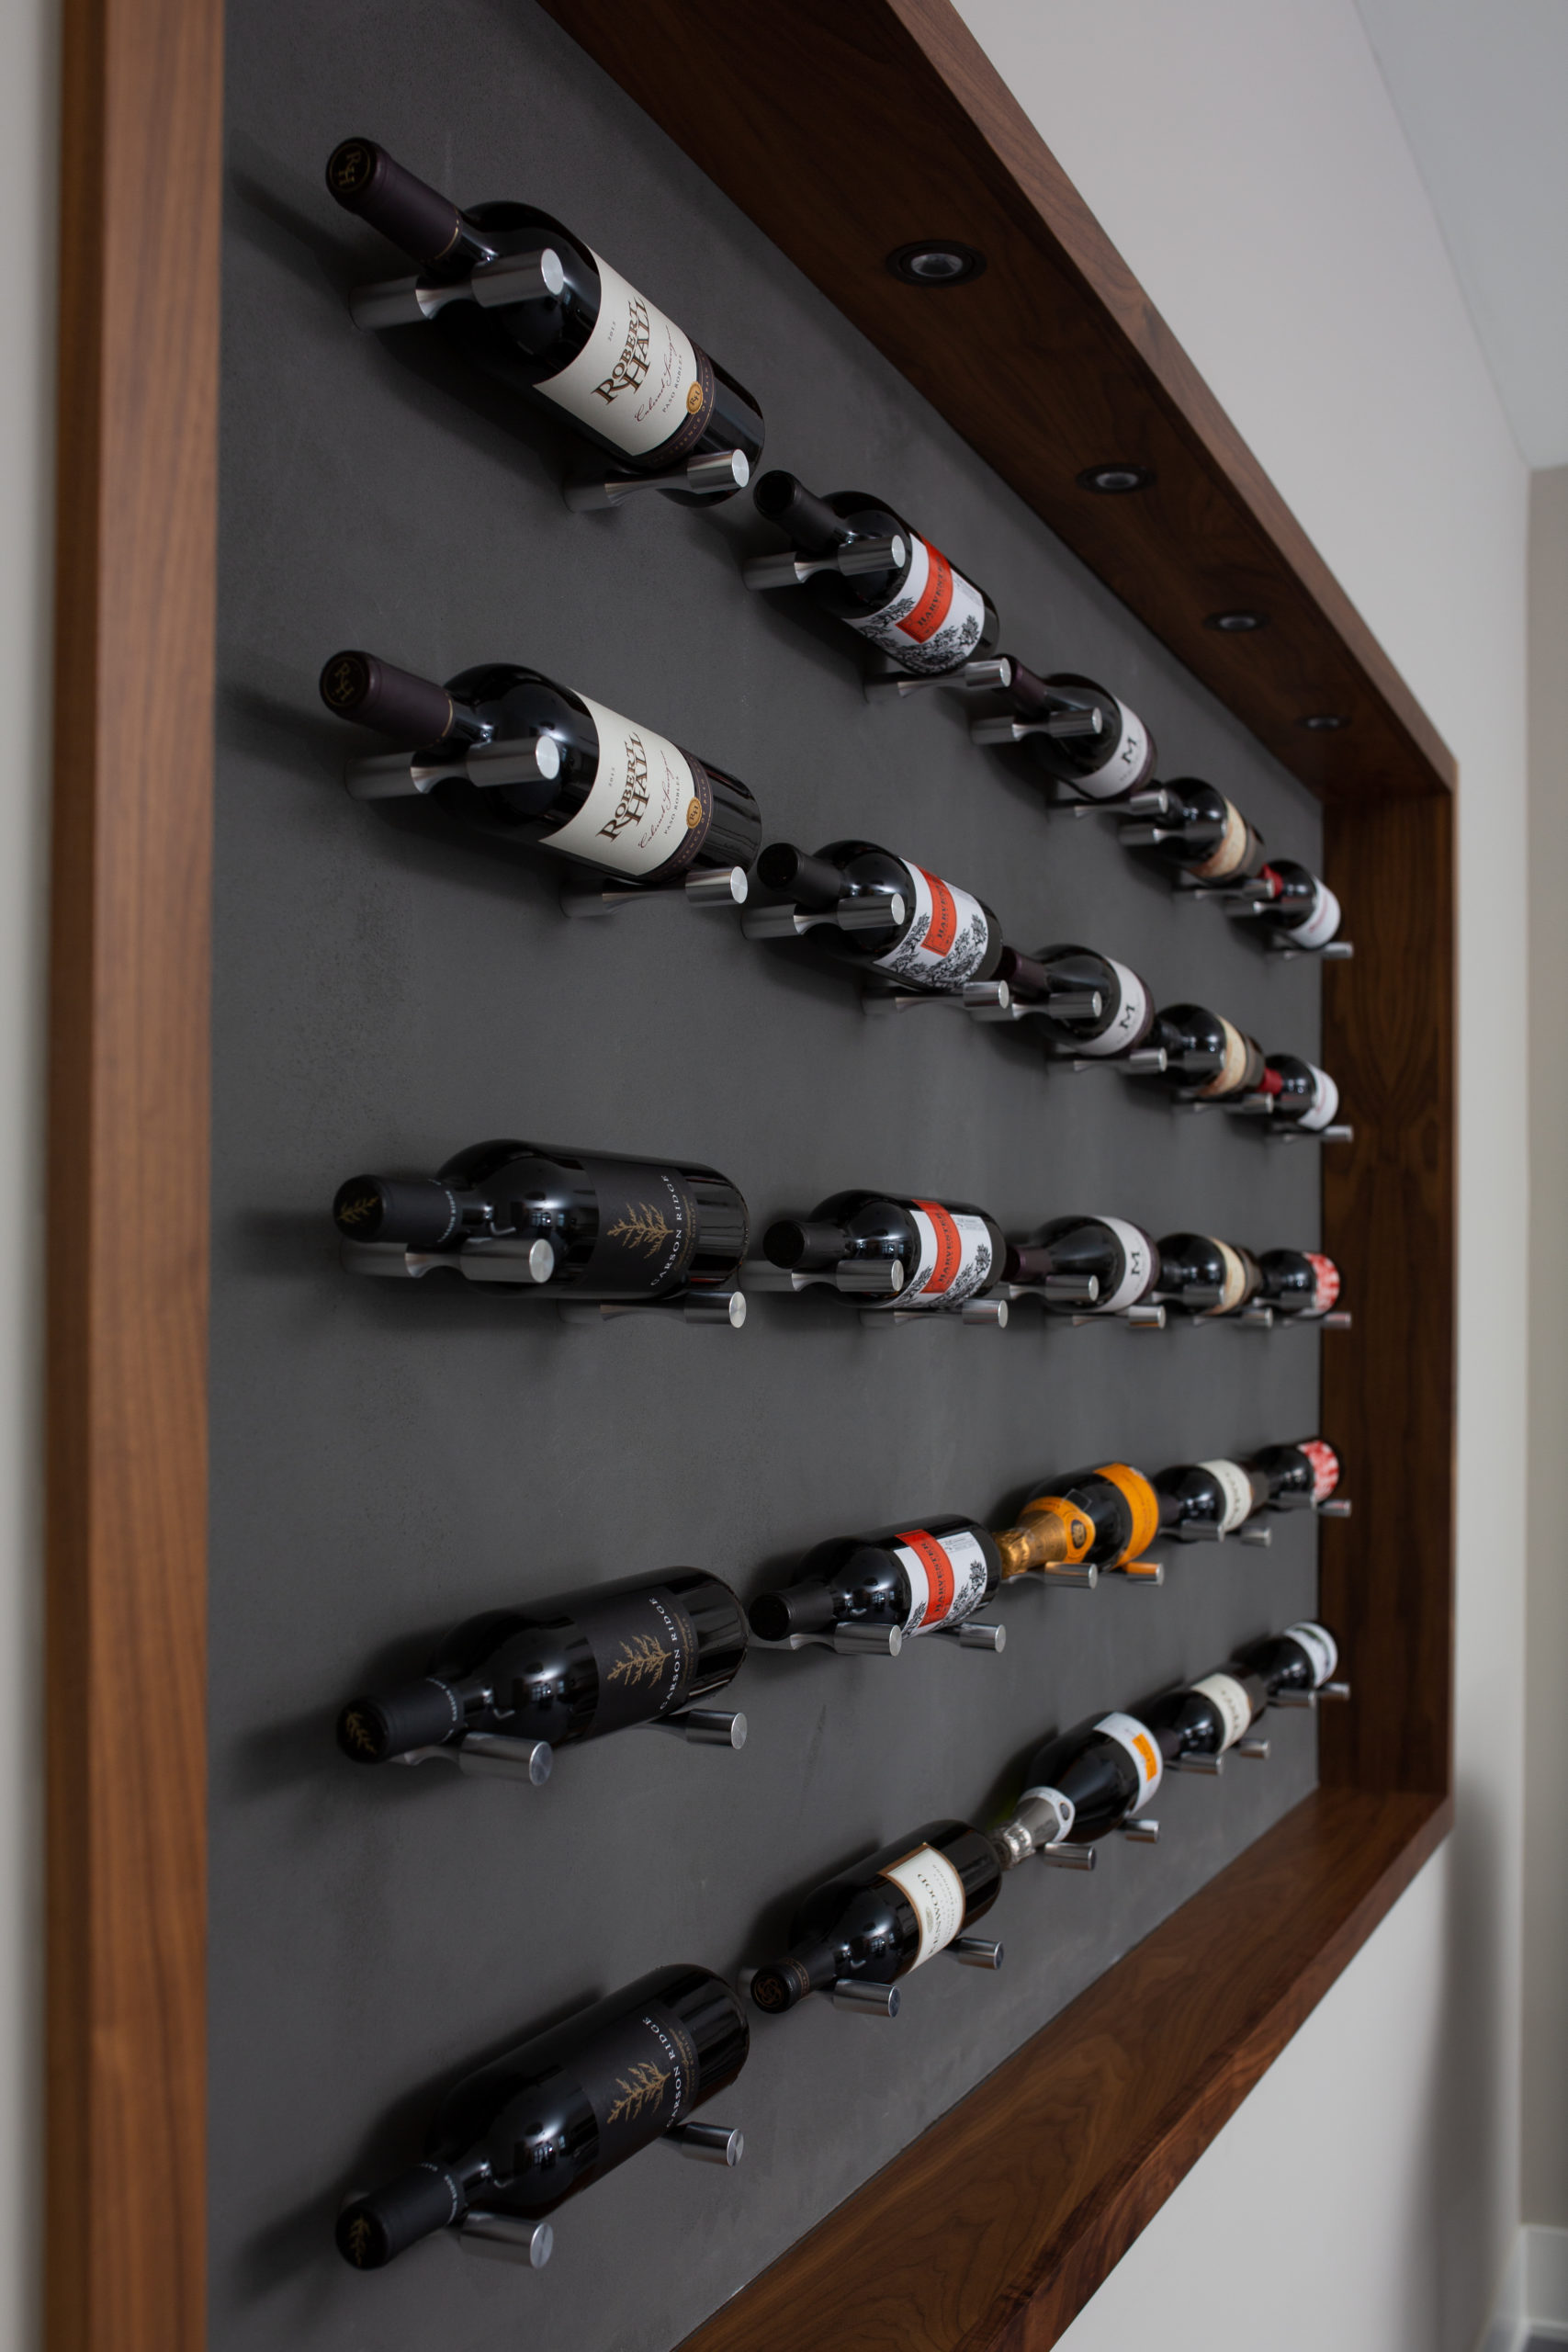 A wall mounted wine rack with wine bottles on it.